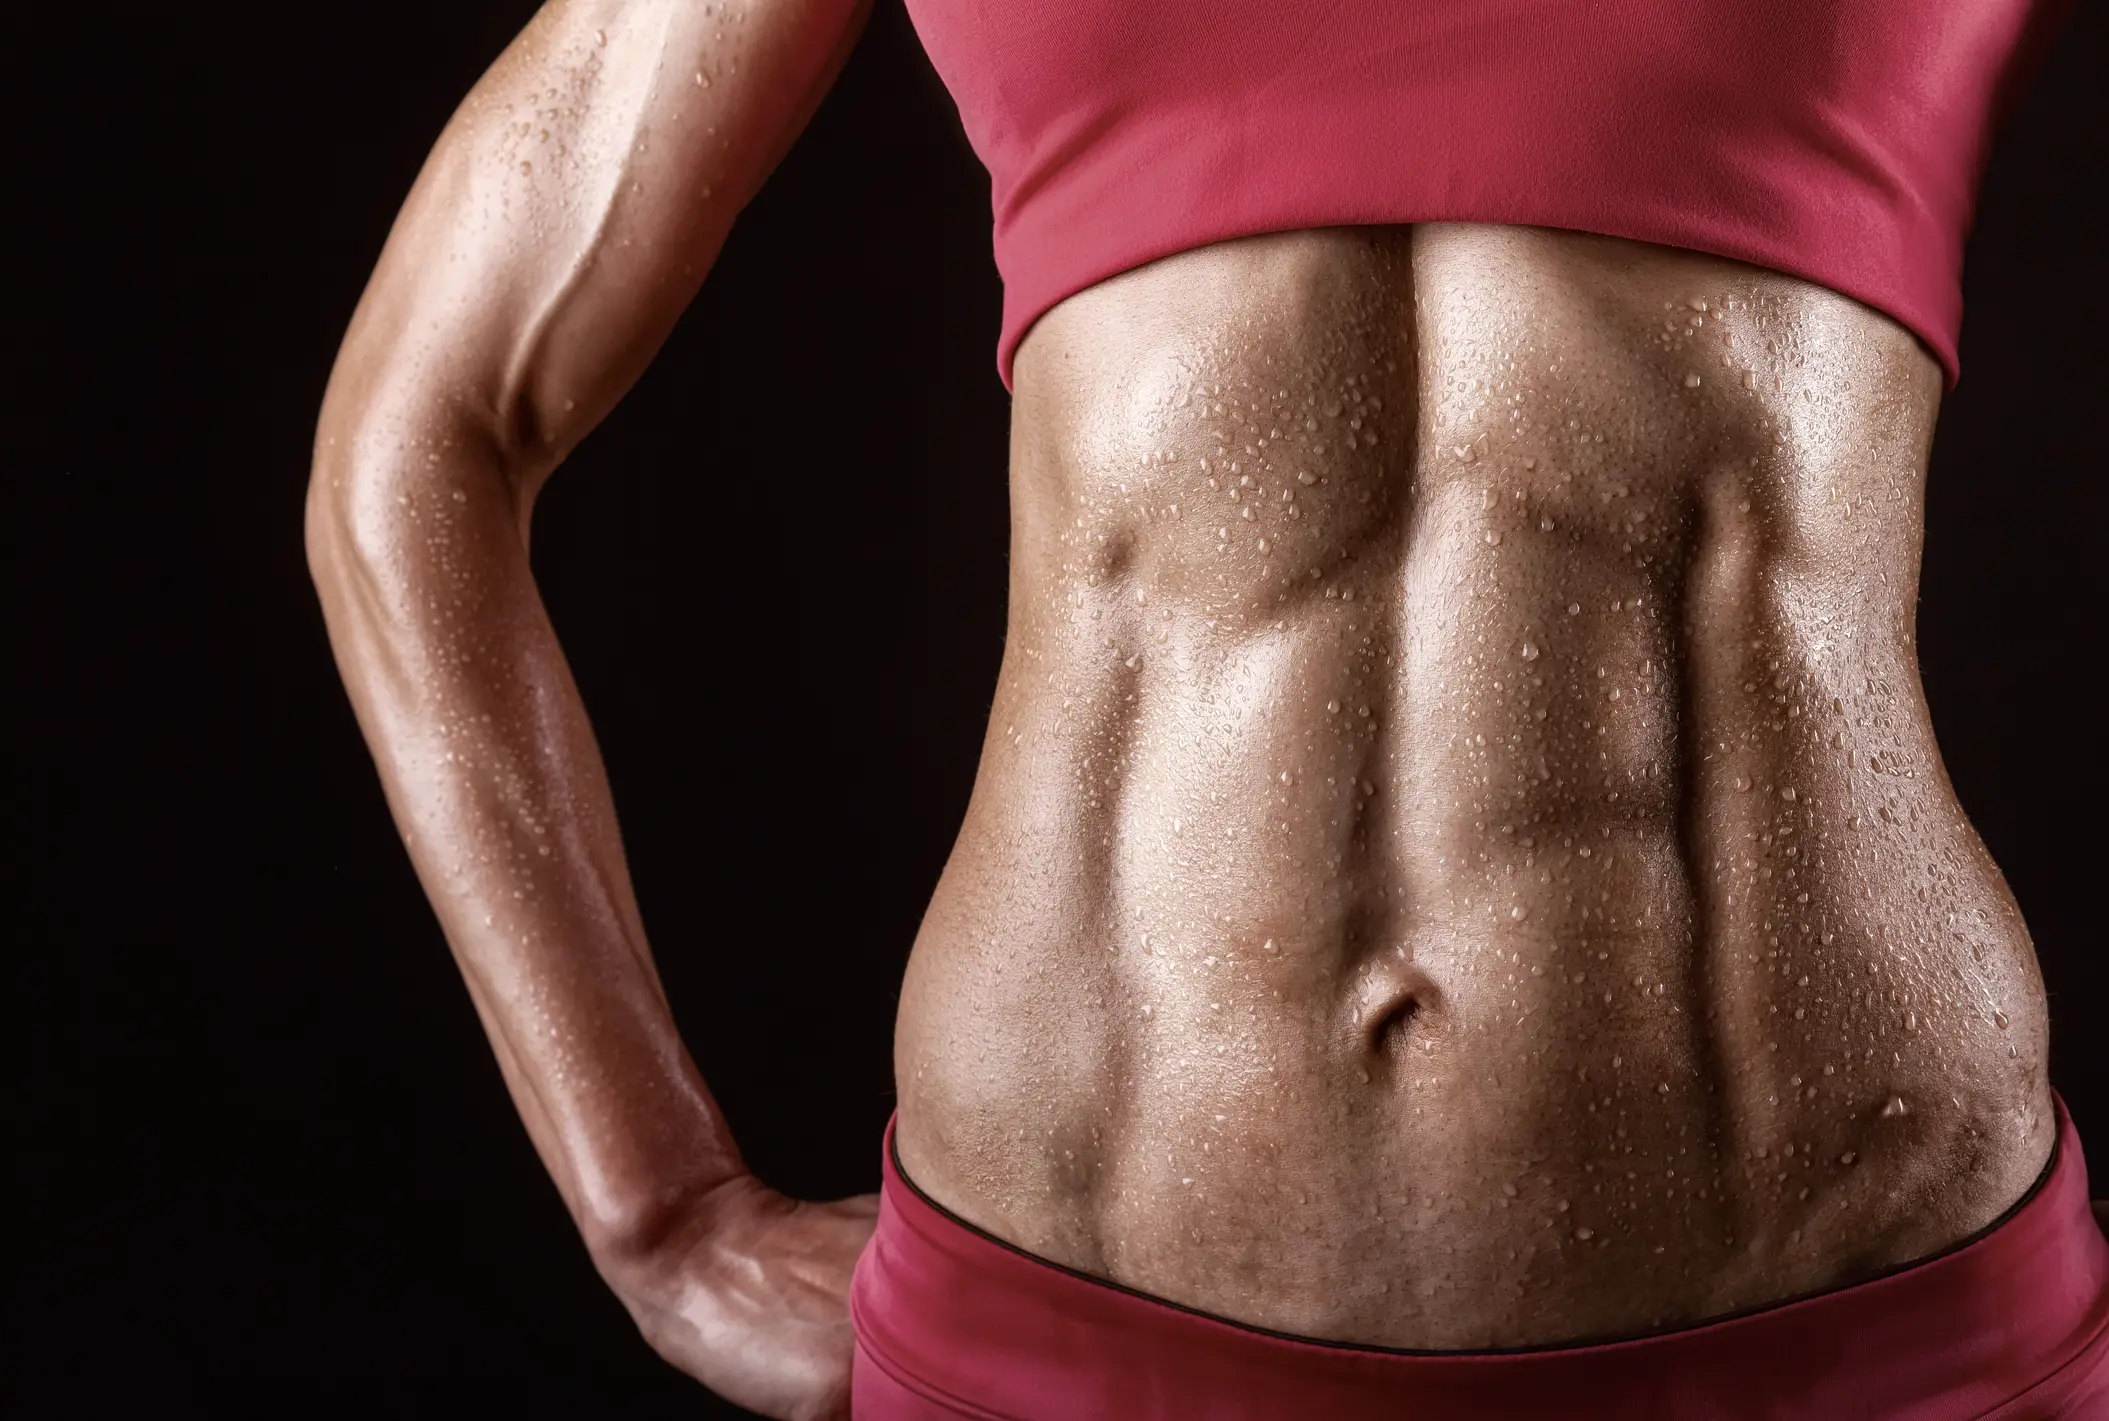 Understanding what a six pack feels like as a woman and for a man